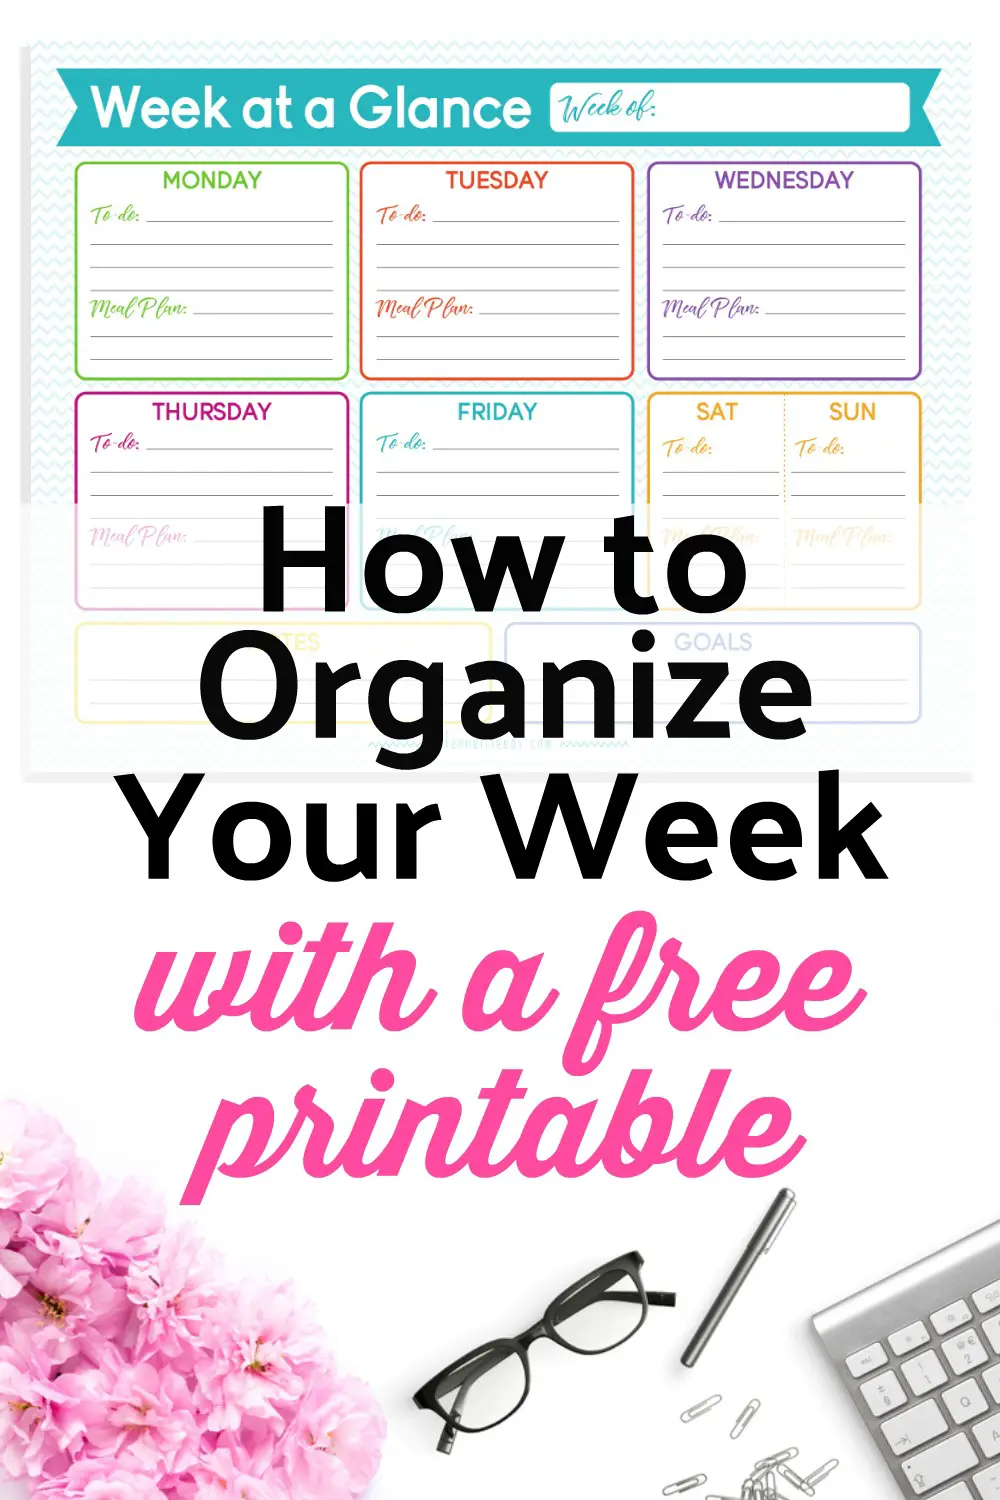 Week at a glance, Weekly To Do List, To Do List, Meal Planning, Organization, Weekly Calendar